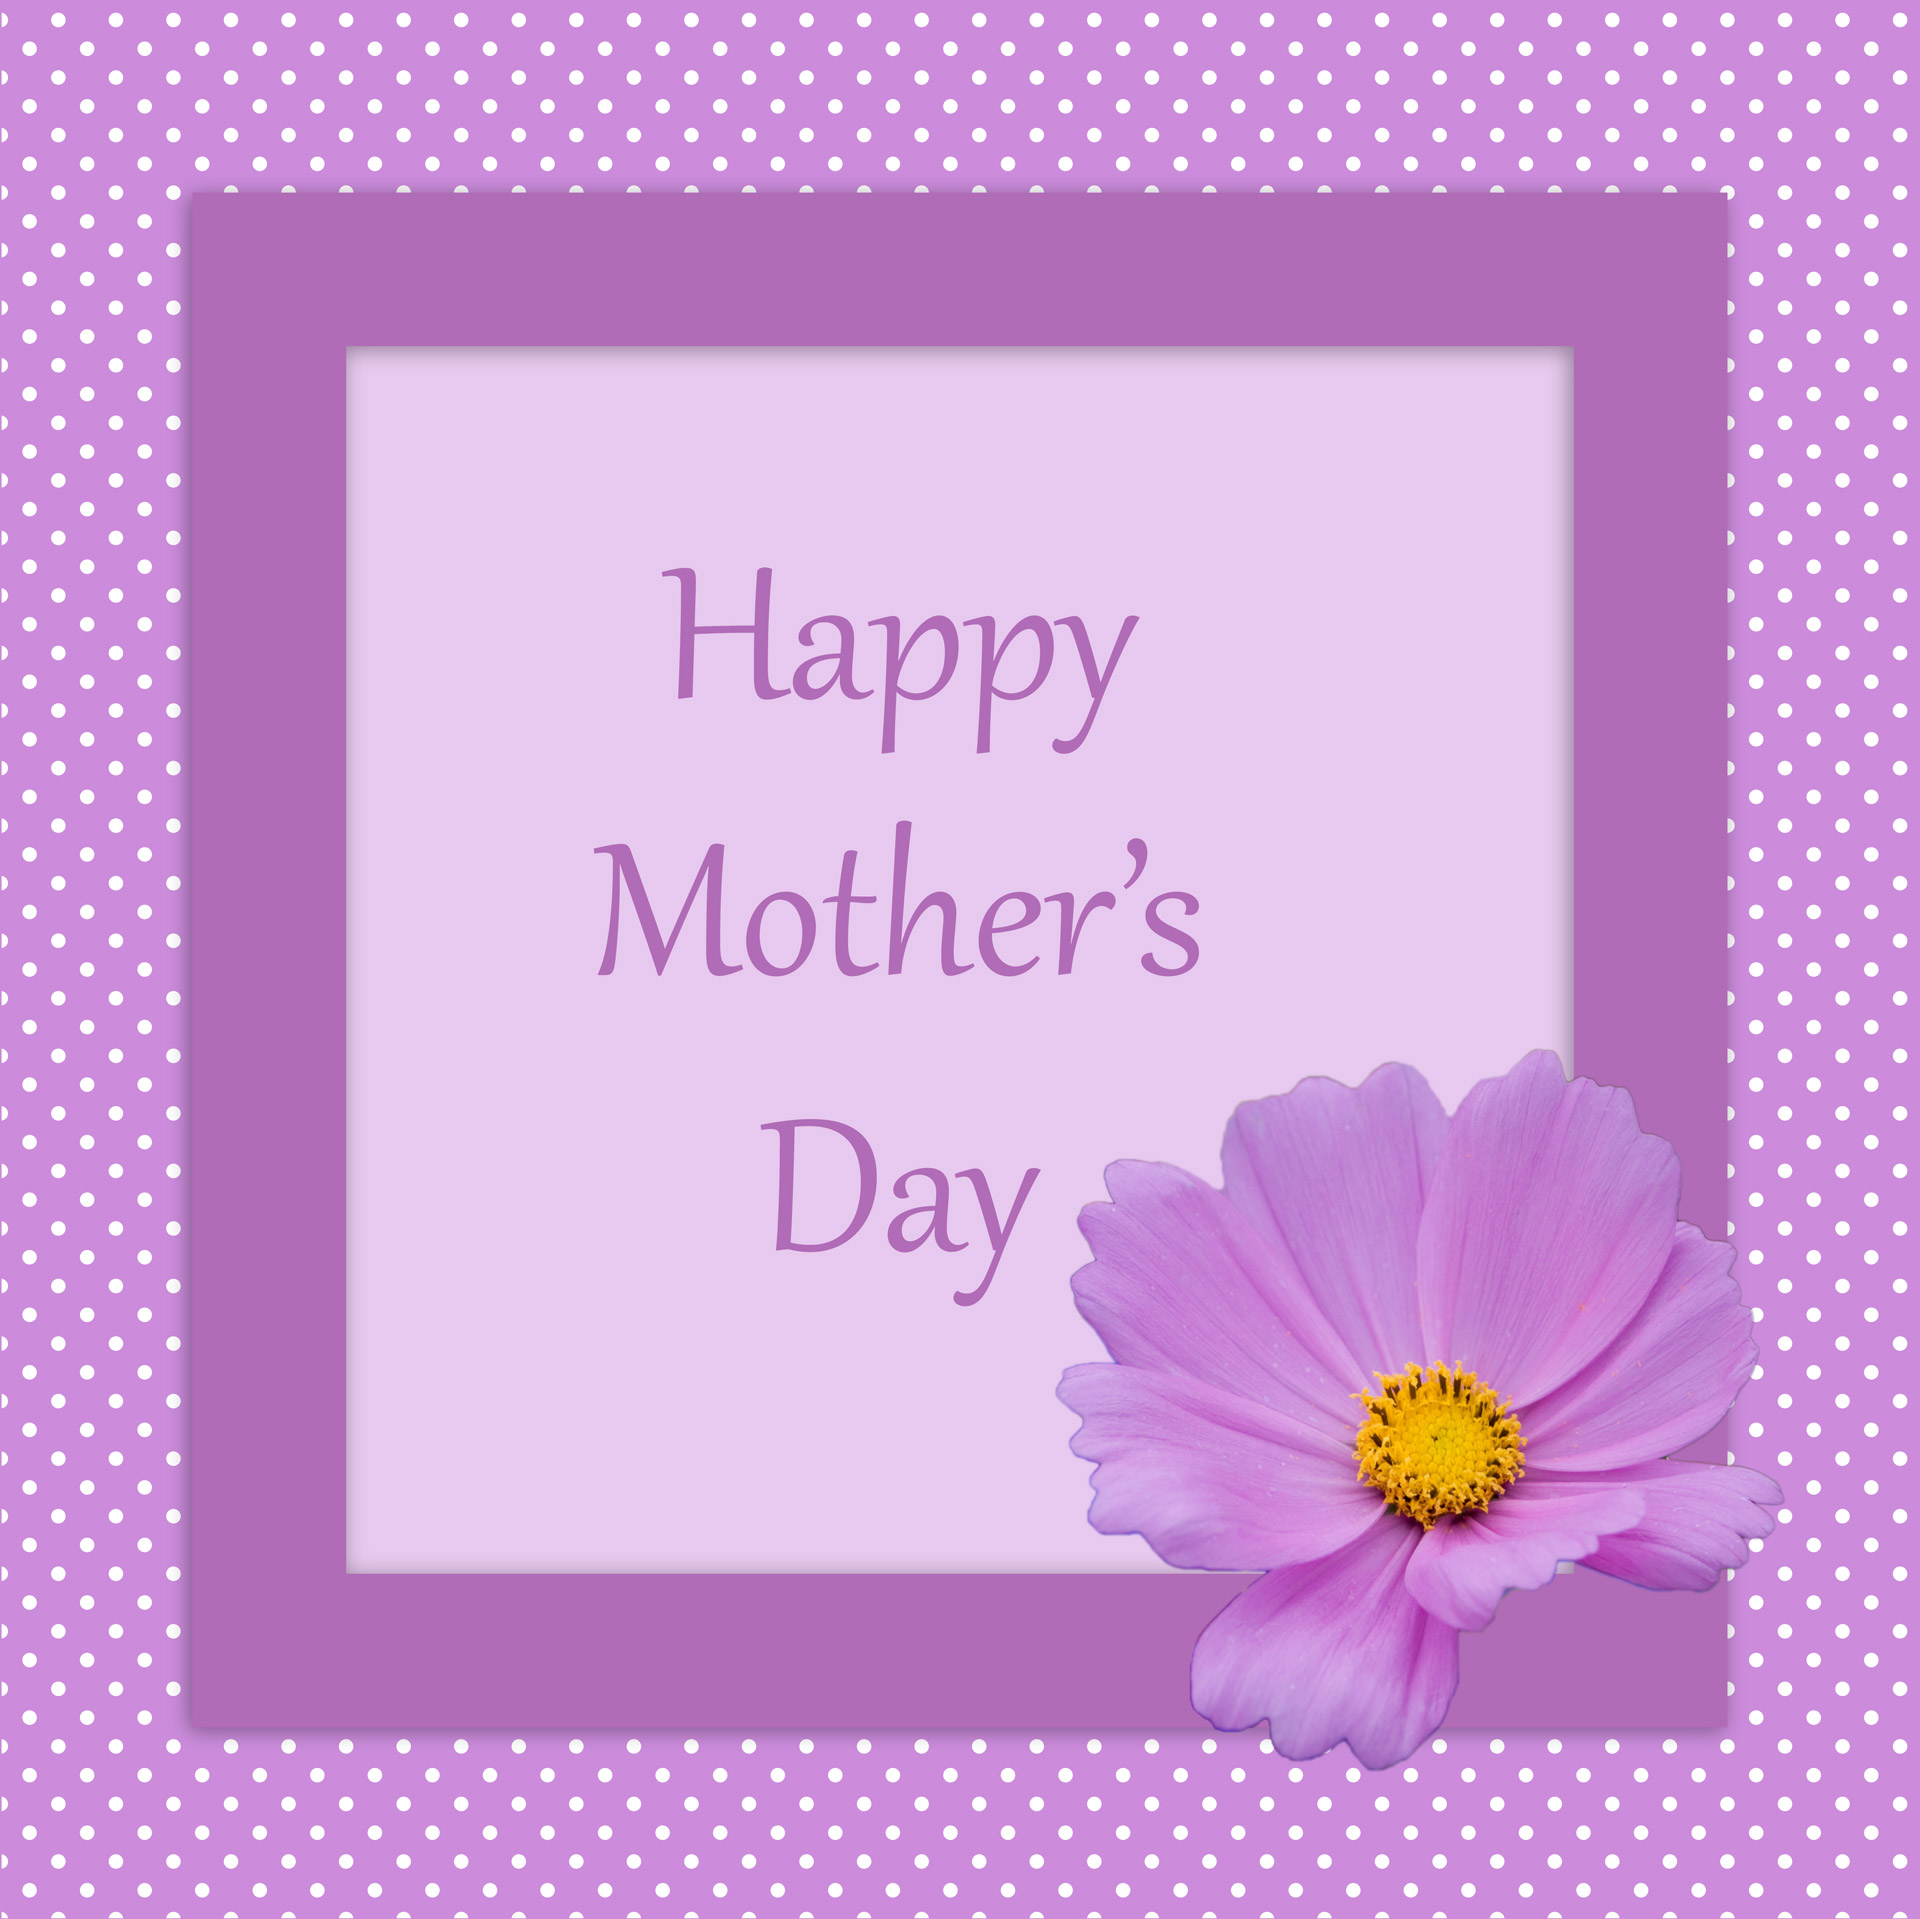 Mother's Day Card Flower